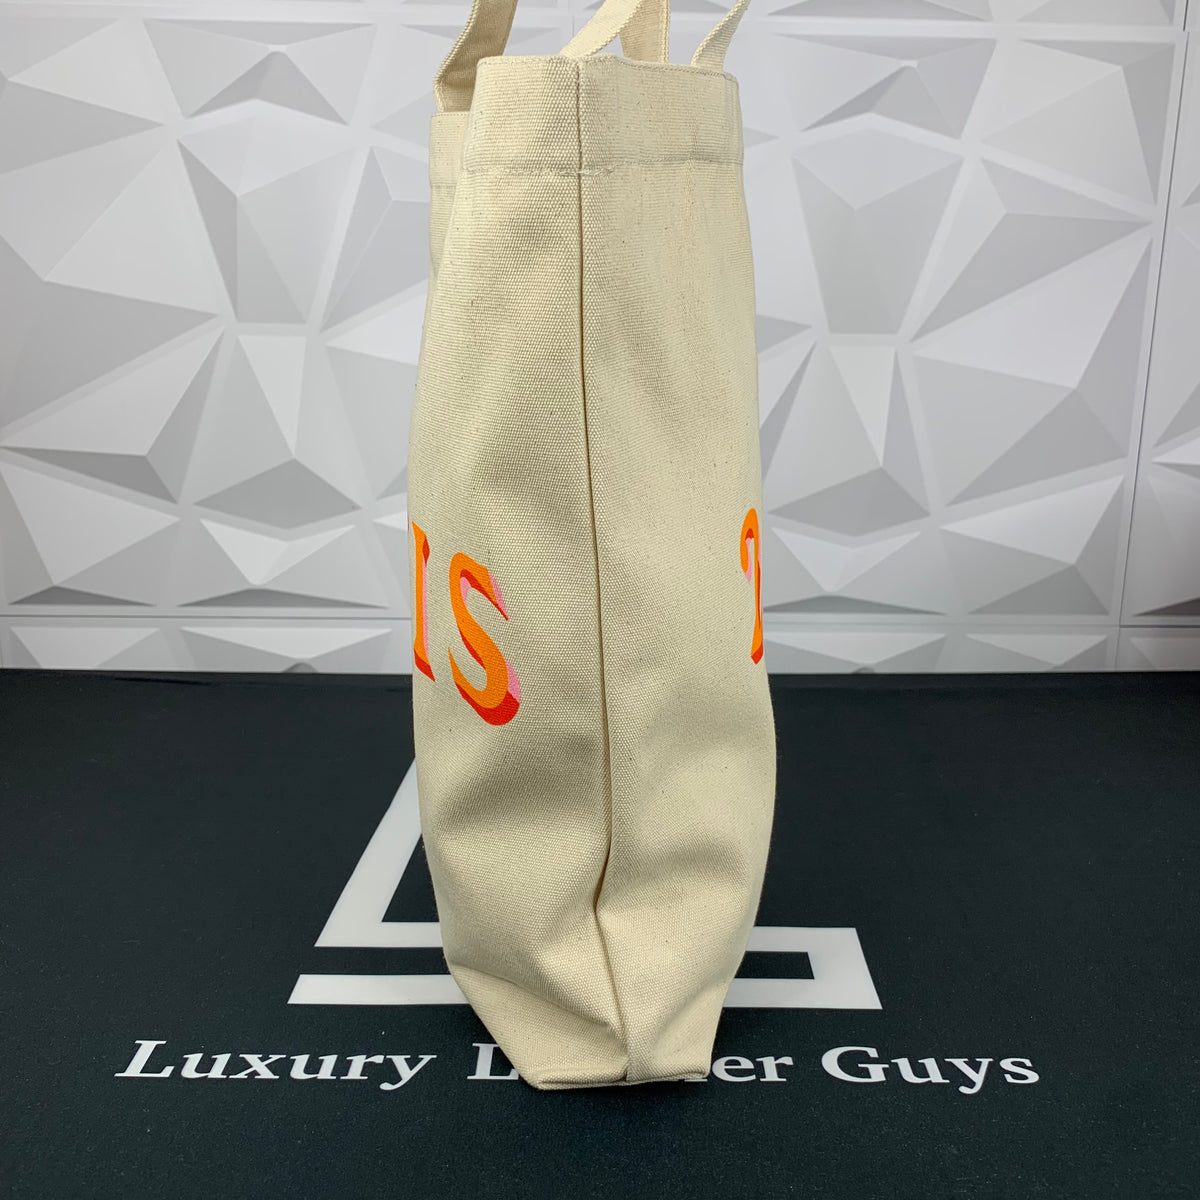 Louis Vuitton 200th Anniversary Trunks NYC Exhibition Exclusive Canvas Tote  Bag